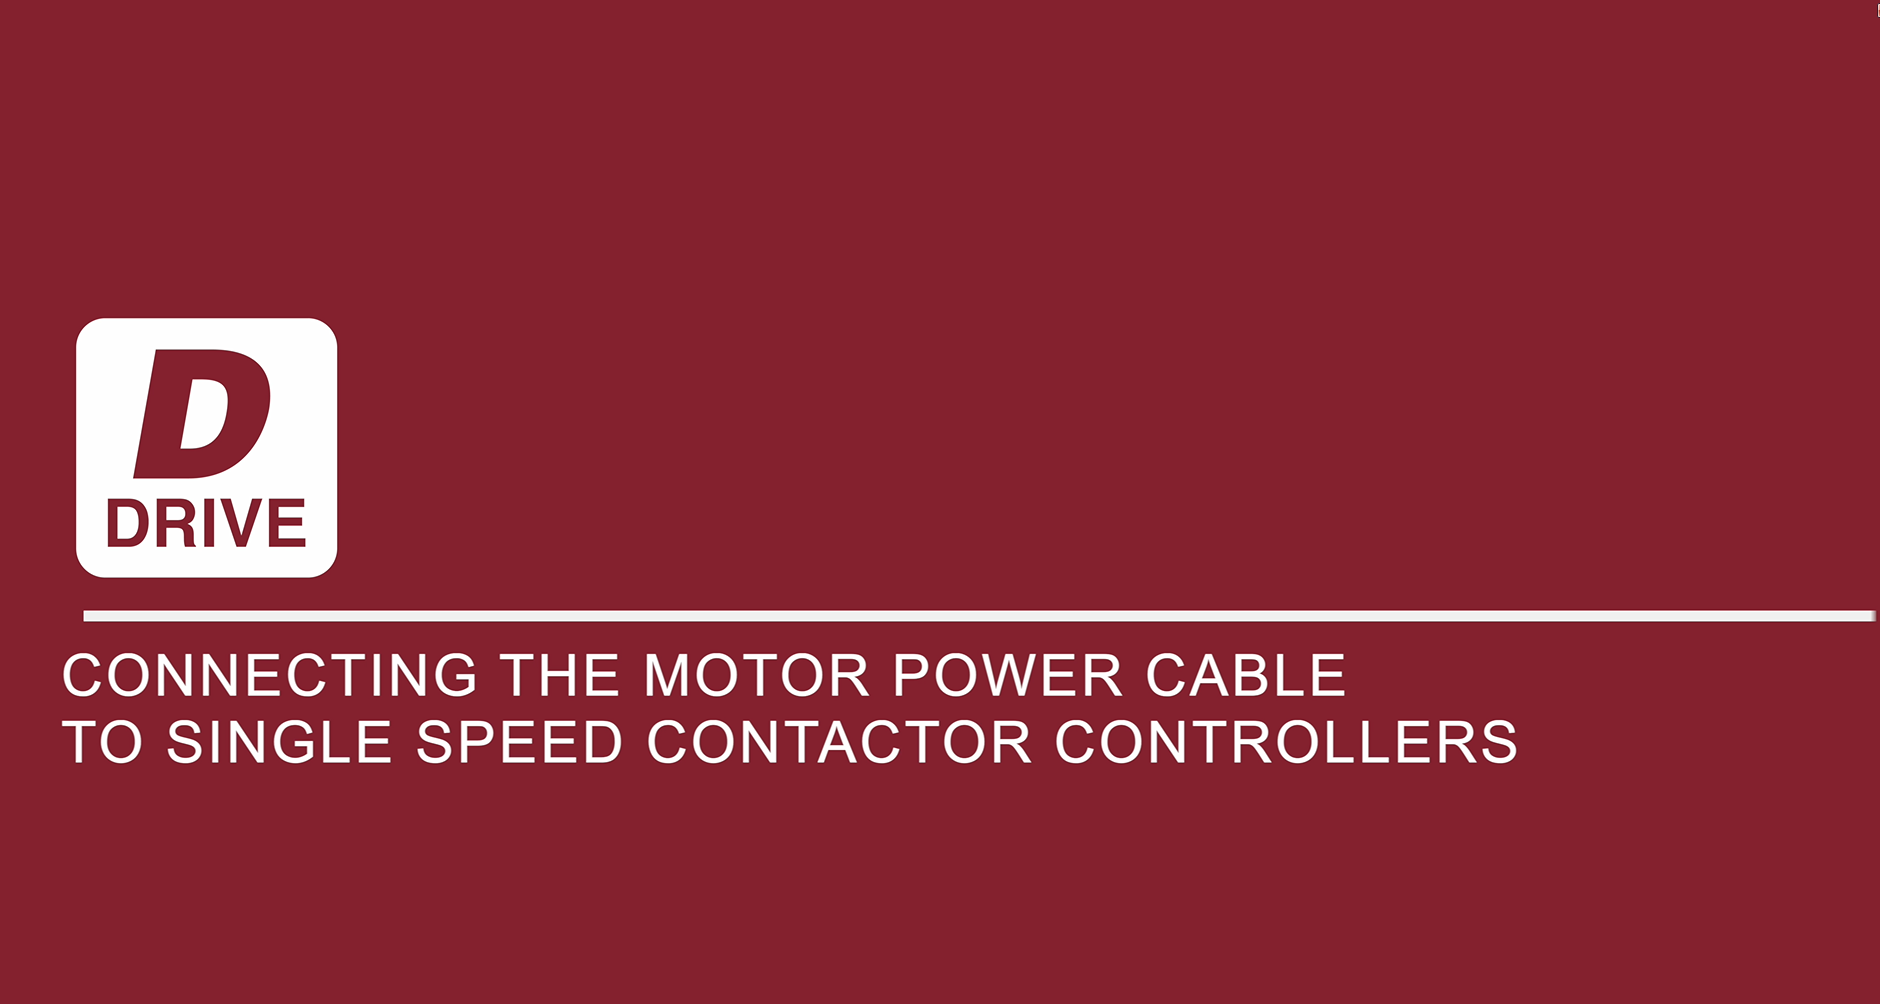 Connecting the motor power cable to single speed contactor controllers